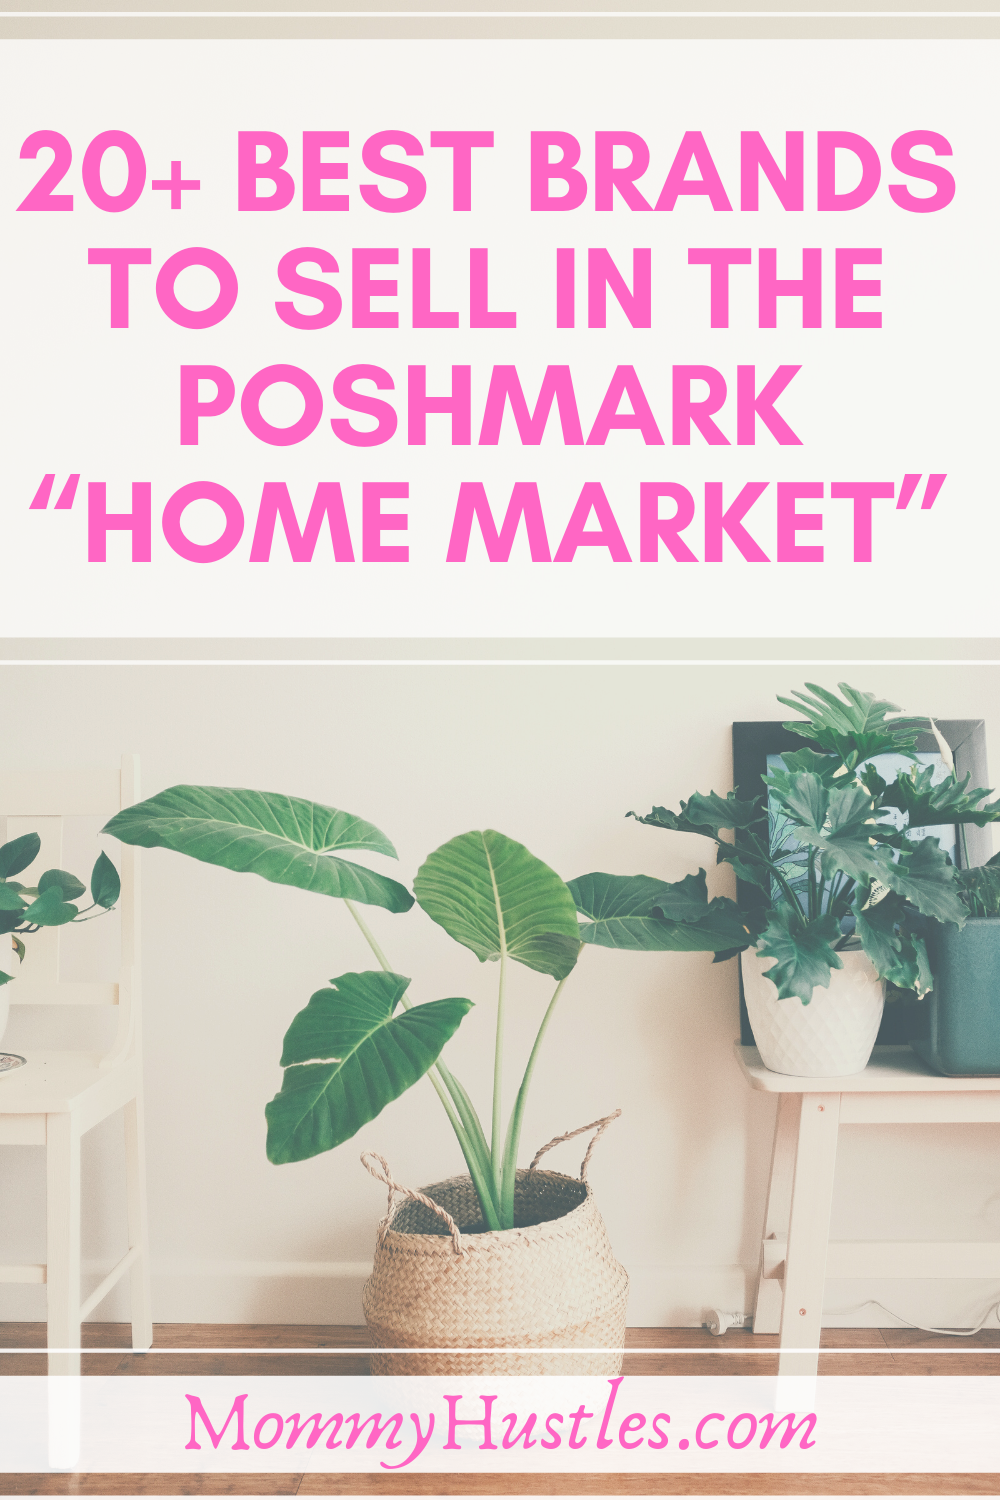 20+ Best Brands to sell in the Poshmark “Home Market”